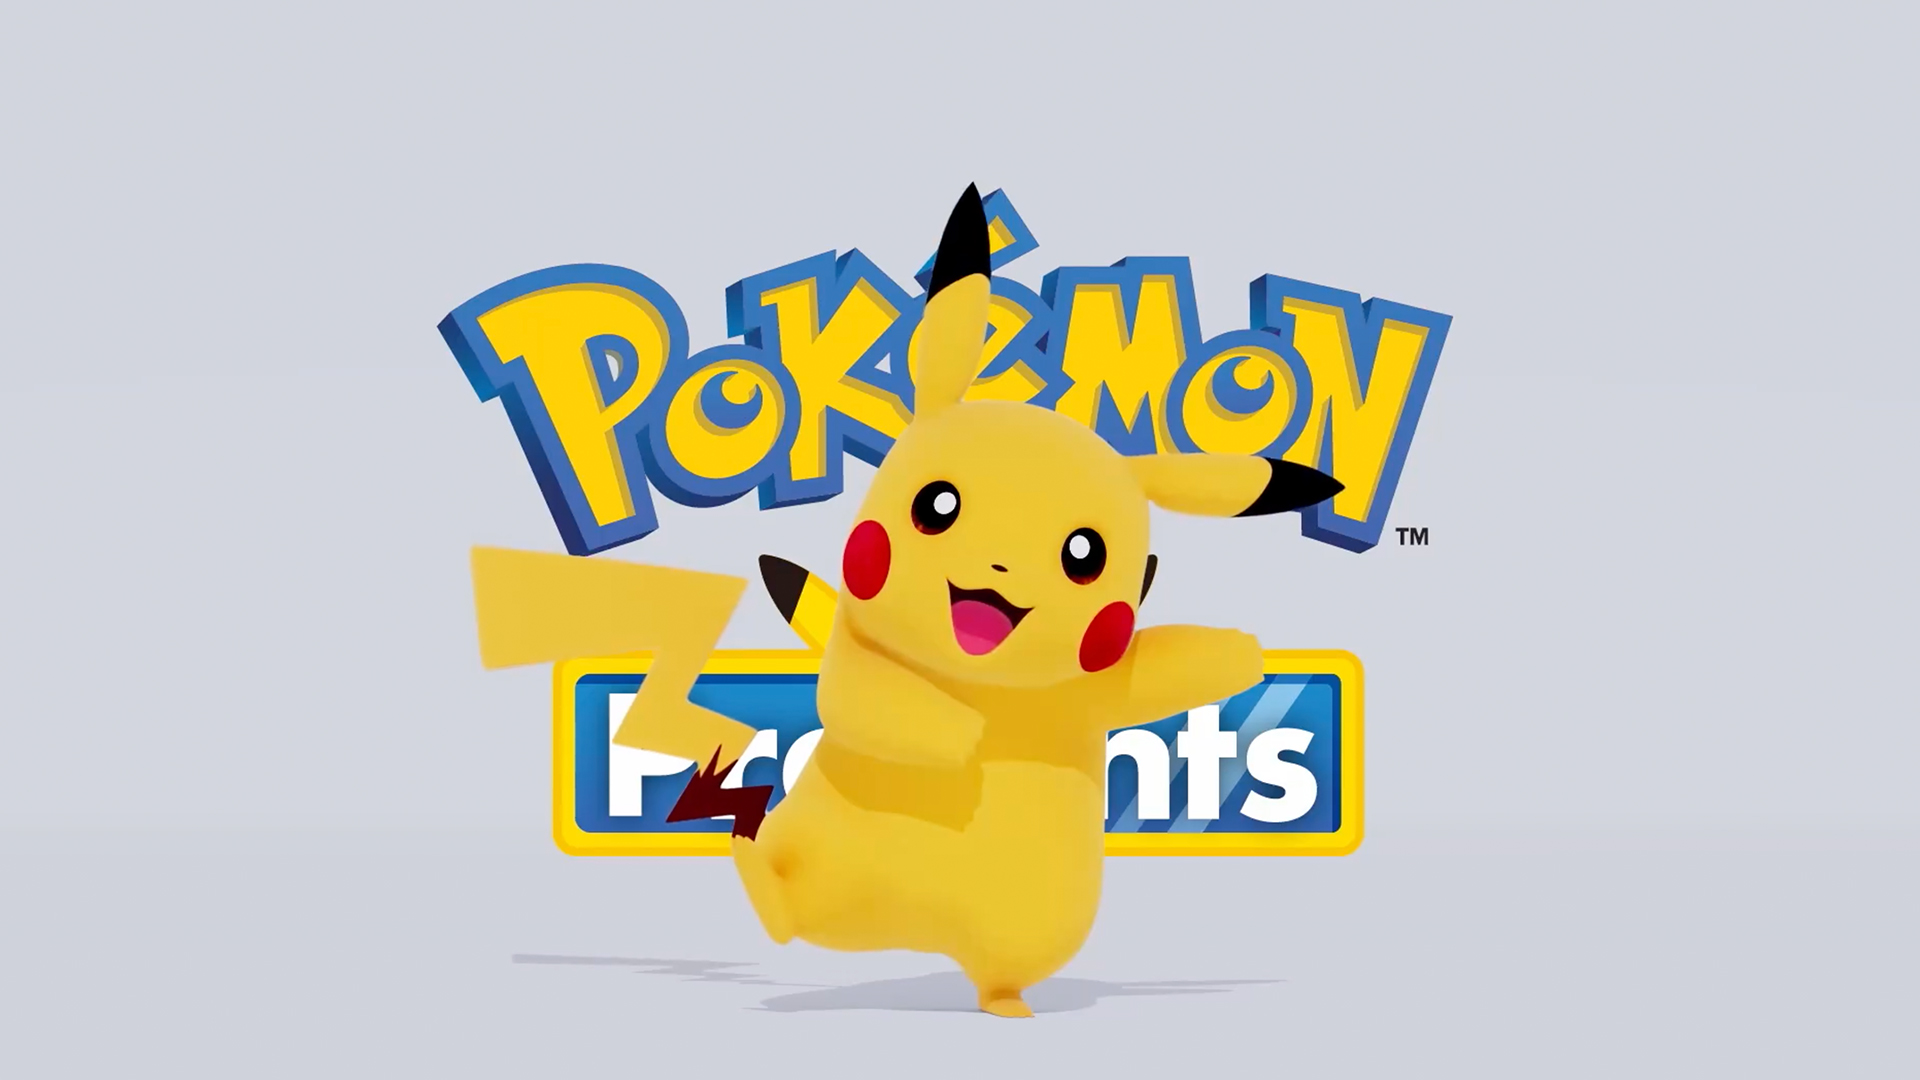  Pokemon Presents live coverage - All the news from today's Pokemon Presents 